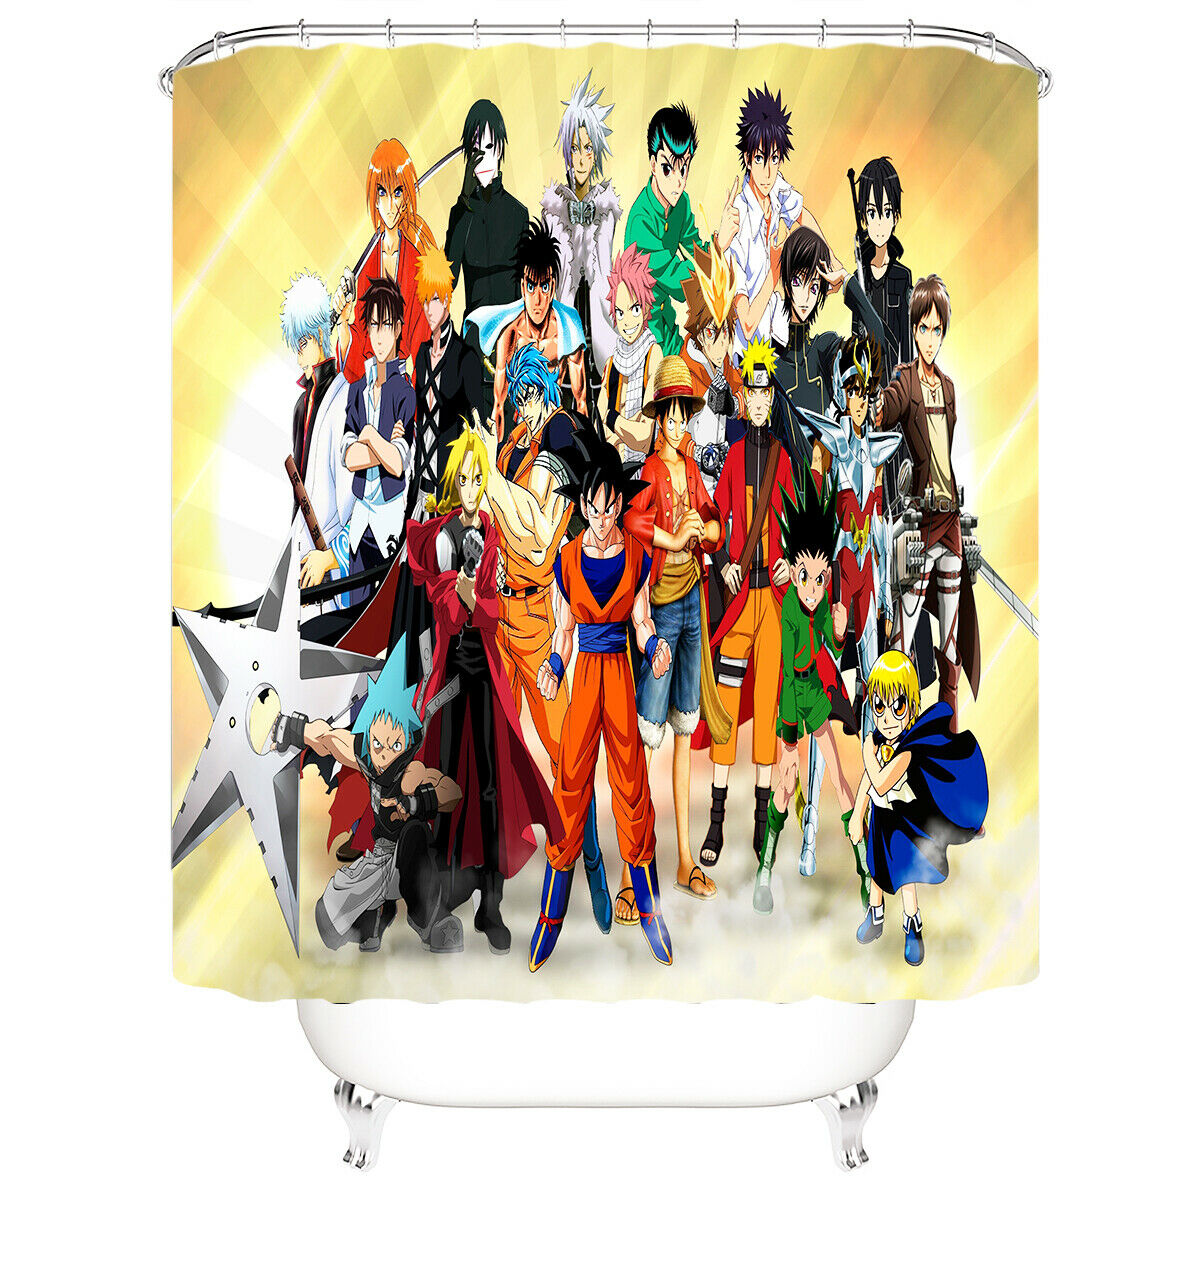 Anime Shower Curtain Bathroom Rug Set Thick Bath Mat Non-Slip Toilet Lid Cover-180×180cm Shower Curtain Only-Free Shipping at meselling99